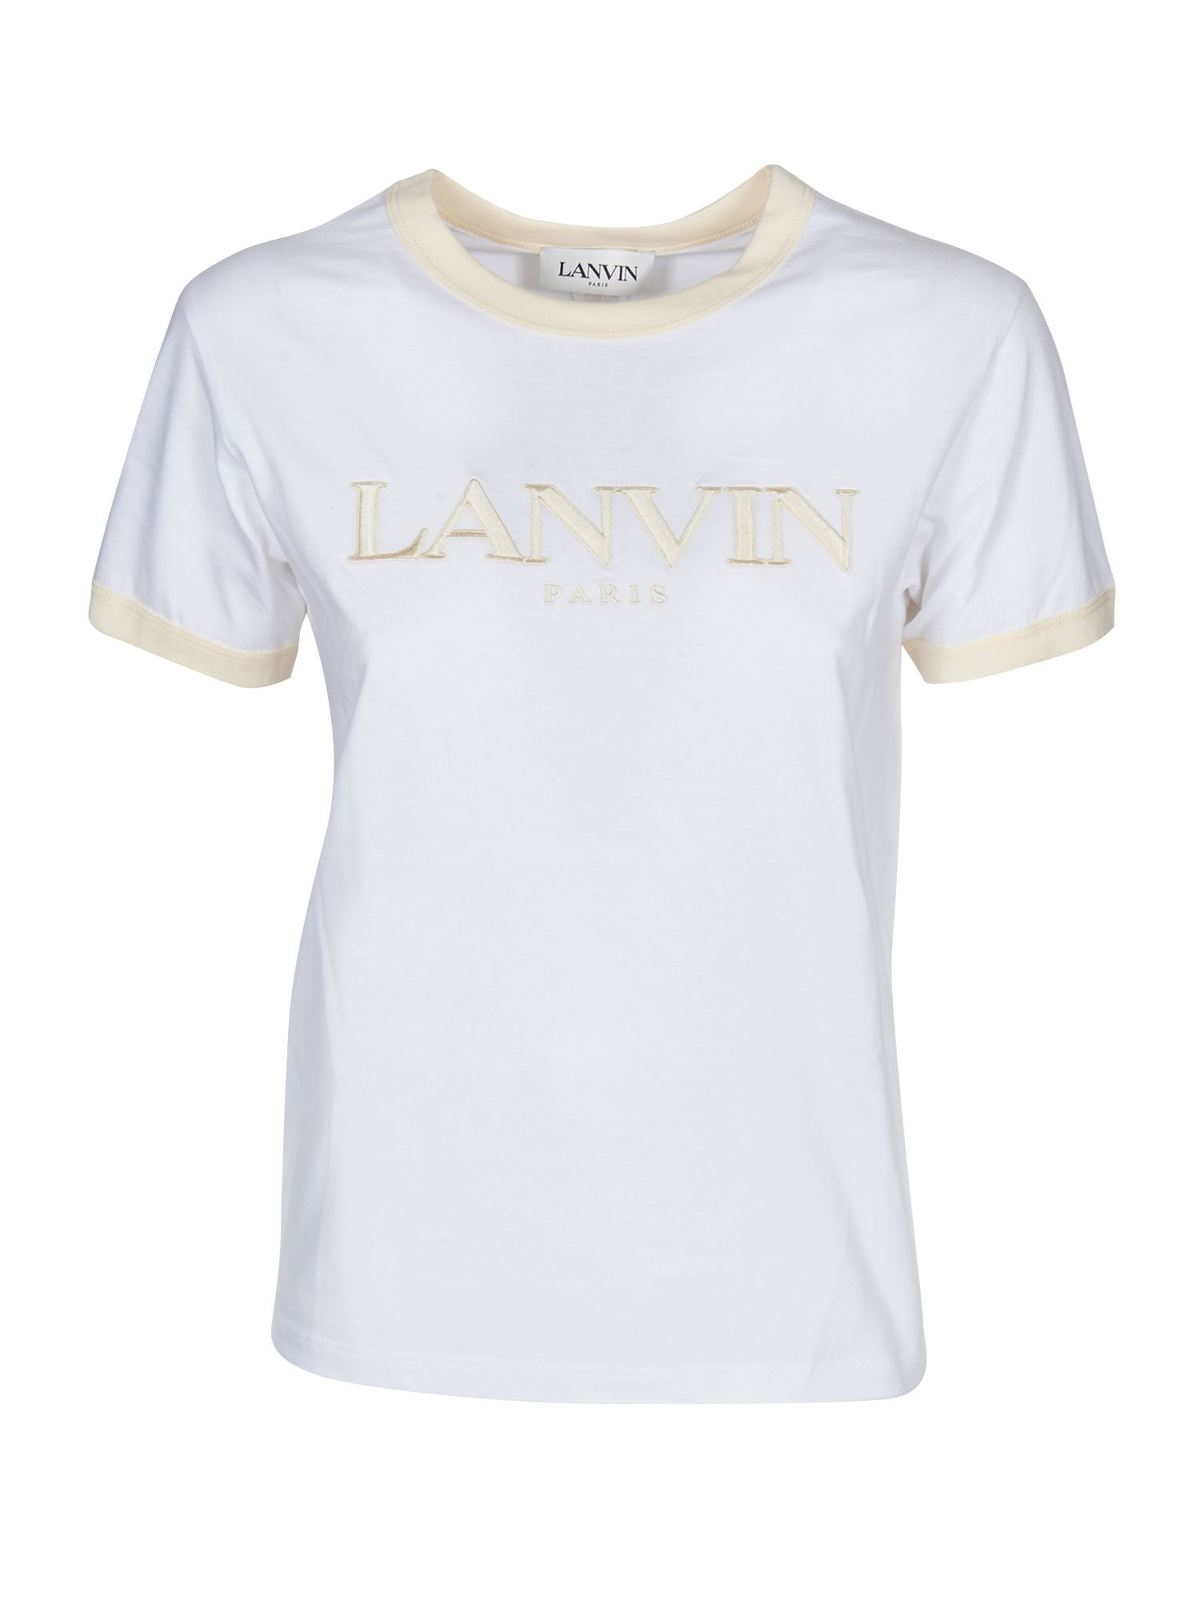 Lanvin EMBROIDERED LOGO T-SHIRT IN WHITE